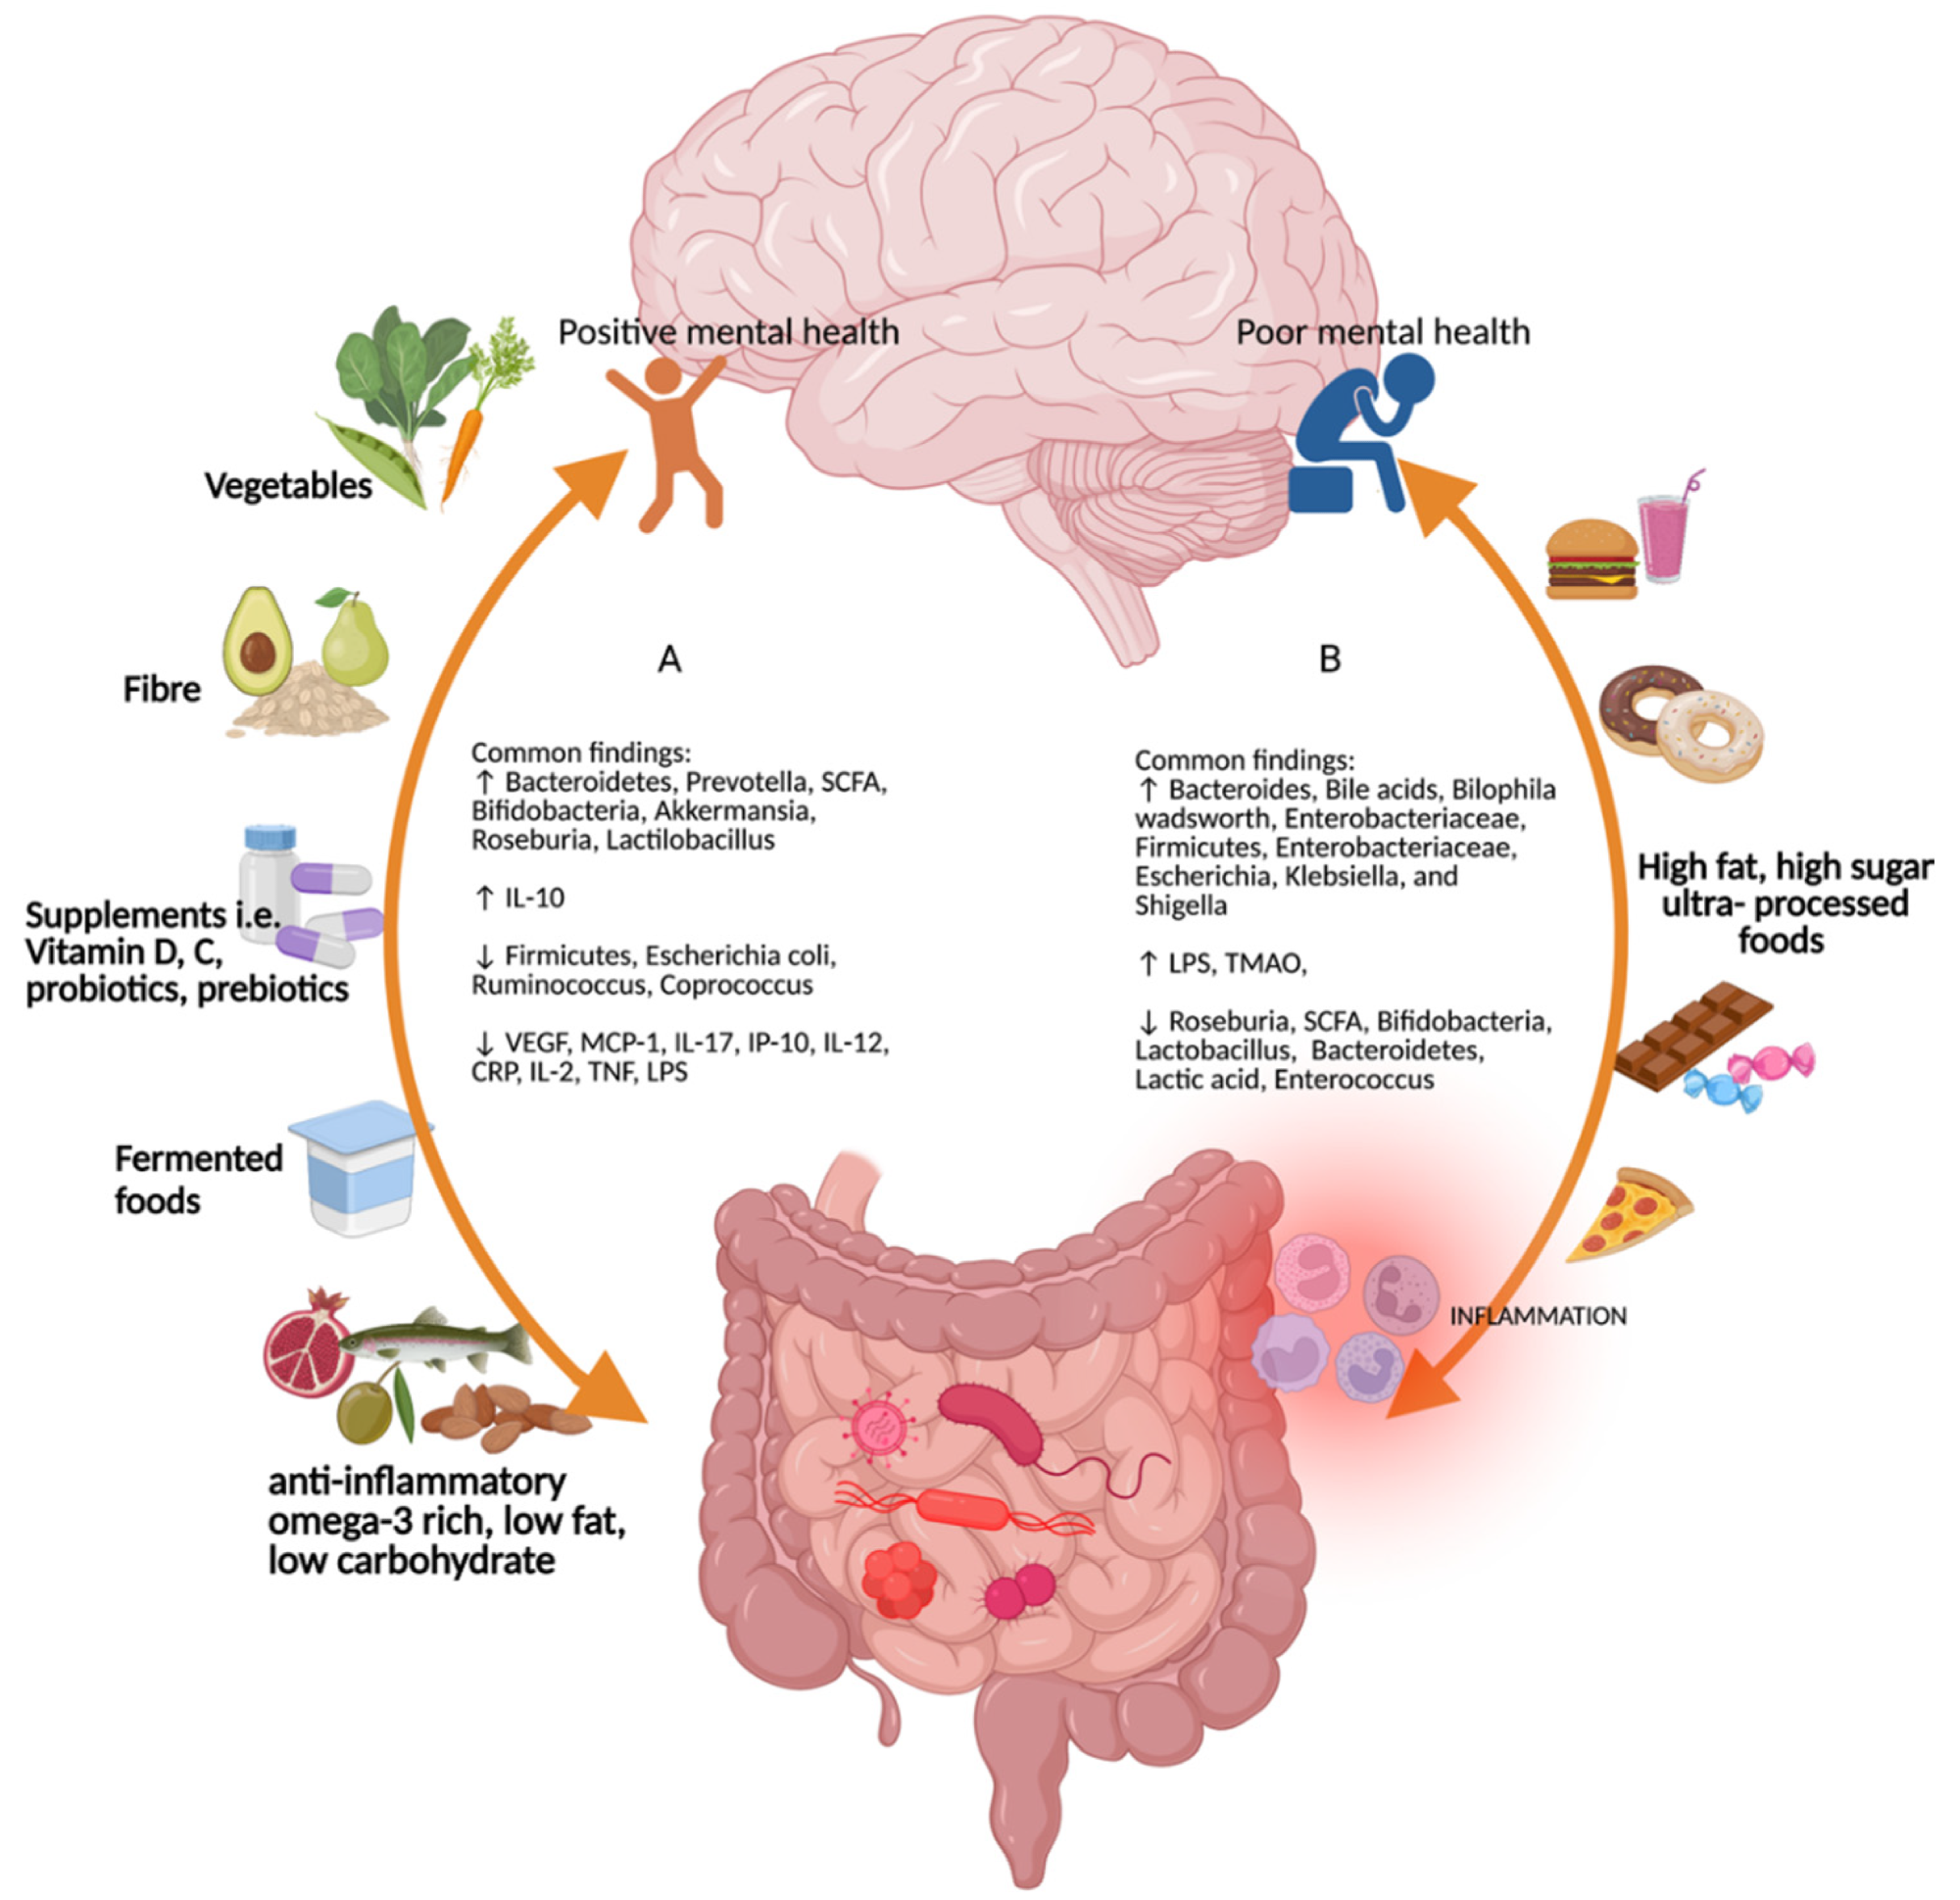 General findings for a variety of diets on the intestinal-brain-microbiome axis.  (A) Micronutrients such as vegetables, fiber, vitamins D and C, probiotics and prebiotics, fermented foods, foods containing anti-inflammatory omega-3, low fat and low carbohydrate foods promote positive mental health.  Bacteroides, prebhotela, fatty acids, bifodobacteria, lactobacilli, and interleukin (IL) -10, and fermicutus coccyx, Ruminococcus, coprocolytic, Yes.  Gamma-induced proteins 10, IL-17, IL-12, c-reactive proteins, IL-2, tumor necrosis factor, and lipopolysaccharide.  (B) High-fat, high-sugar, and ultra-processed foods increase bacterioids, bile acids, bilophila wadworth, enterobacteriaceae, formicuts, enterobacteriaceae, Escherichia, Klebsiella, and Shigella.  Image created via Biorender (accessed April 29, 2022).